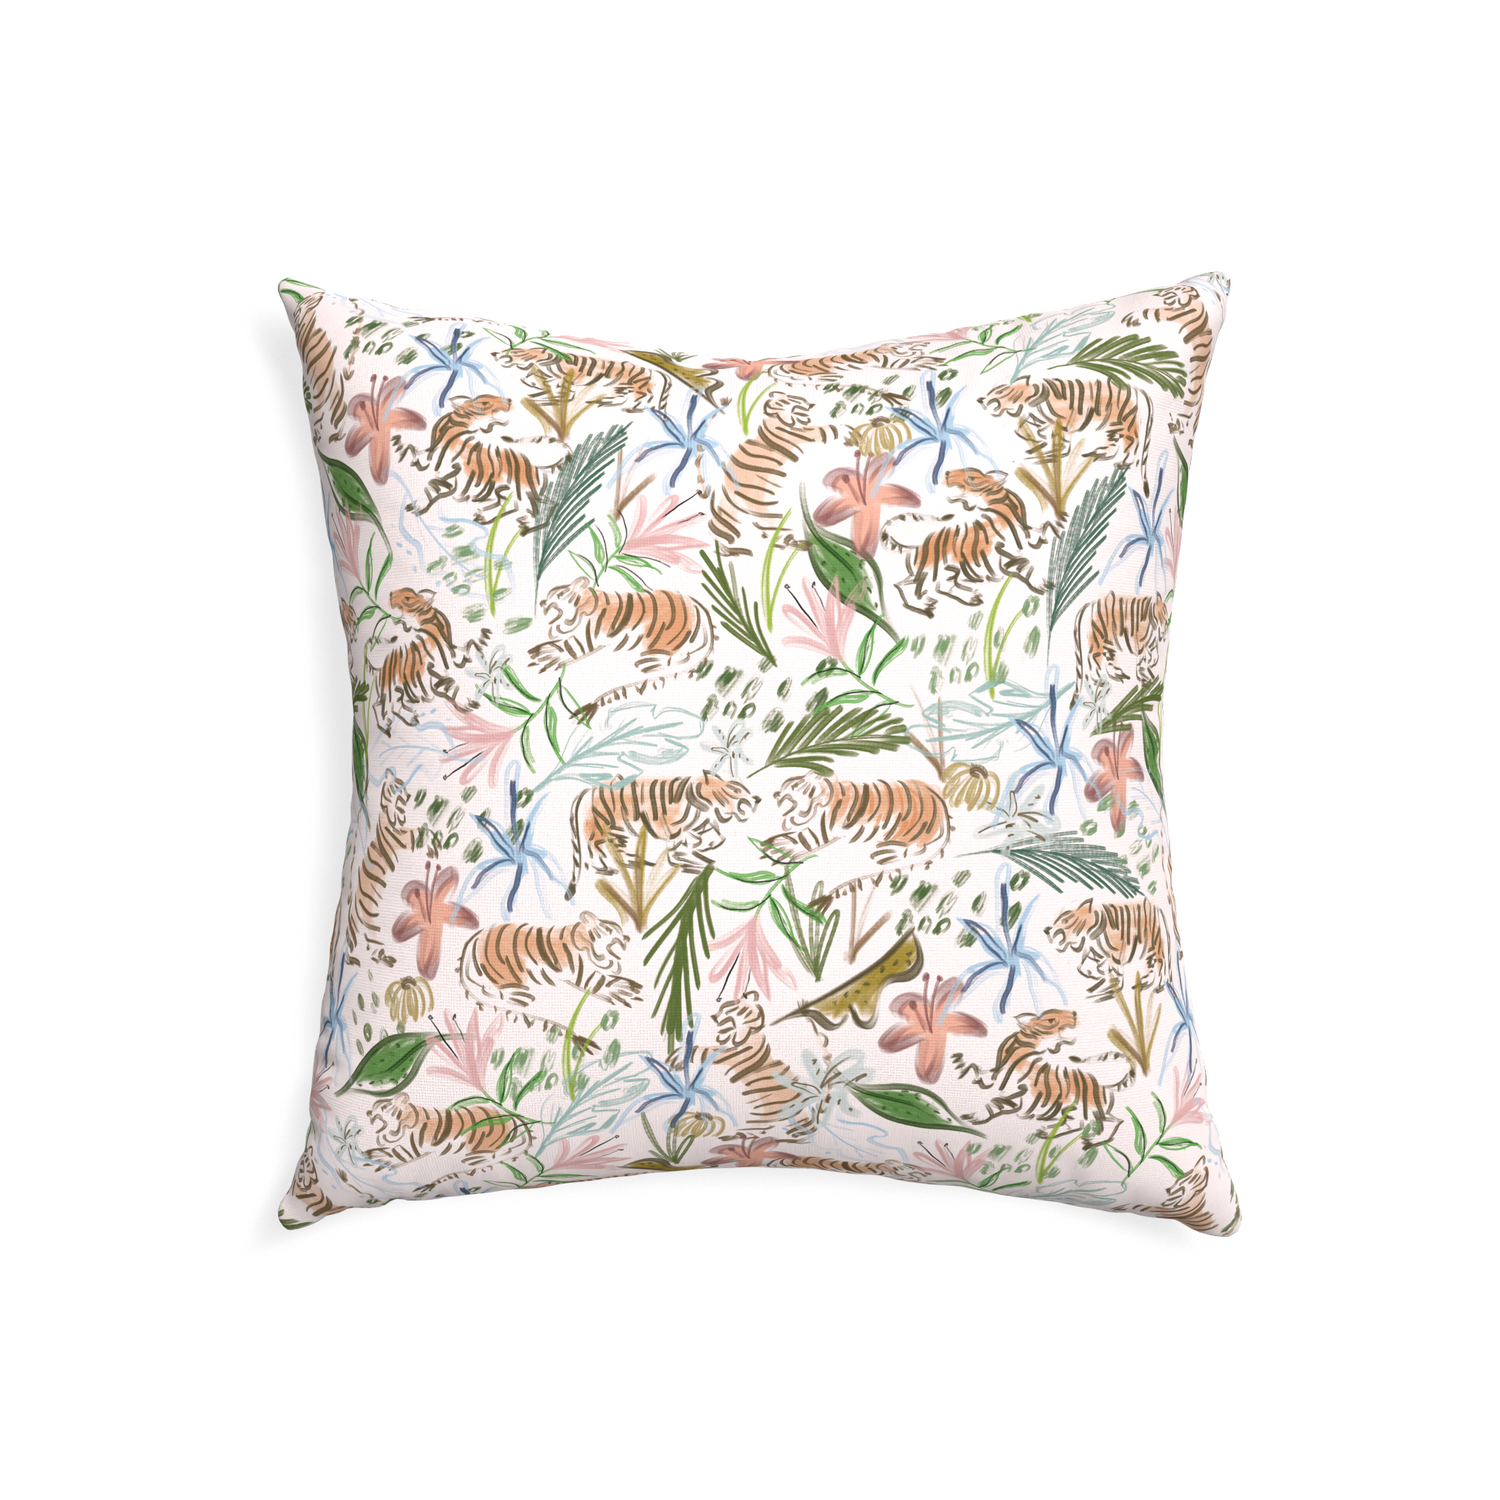 22-square frida pink custom pink chinoiserie tigerpillow with none on white background